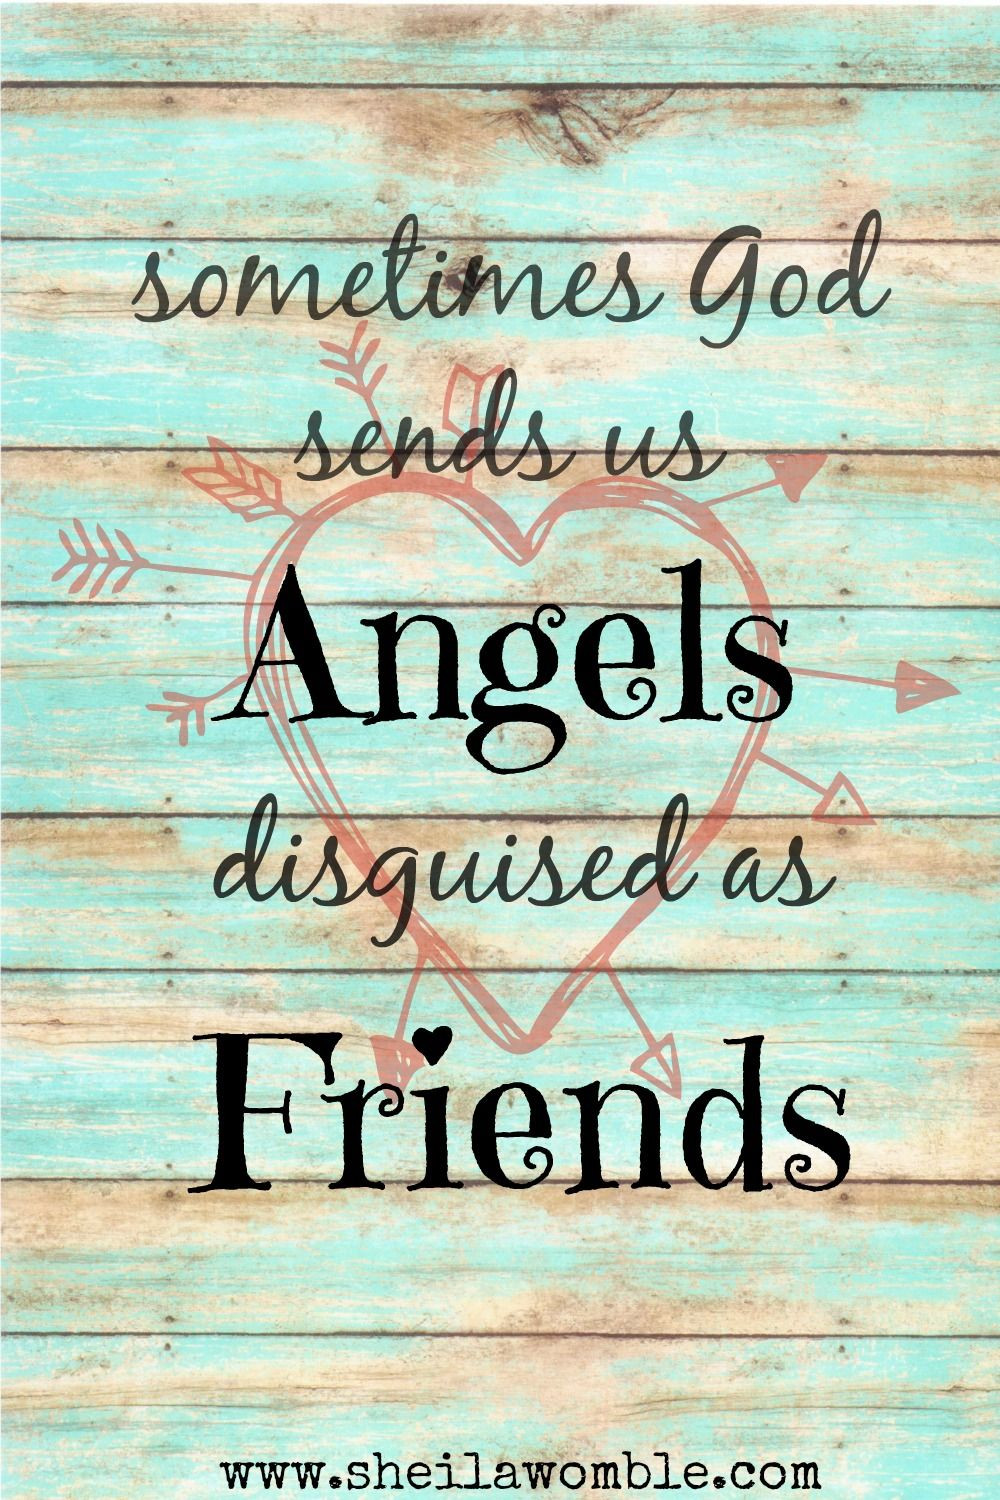 Beautiful Friendship Quotes
 All women need a God sent Friend who shines Jesus